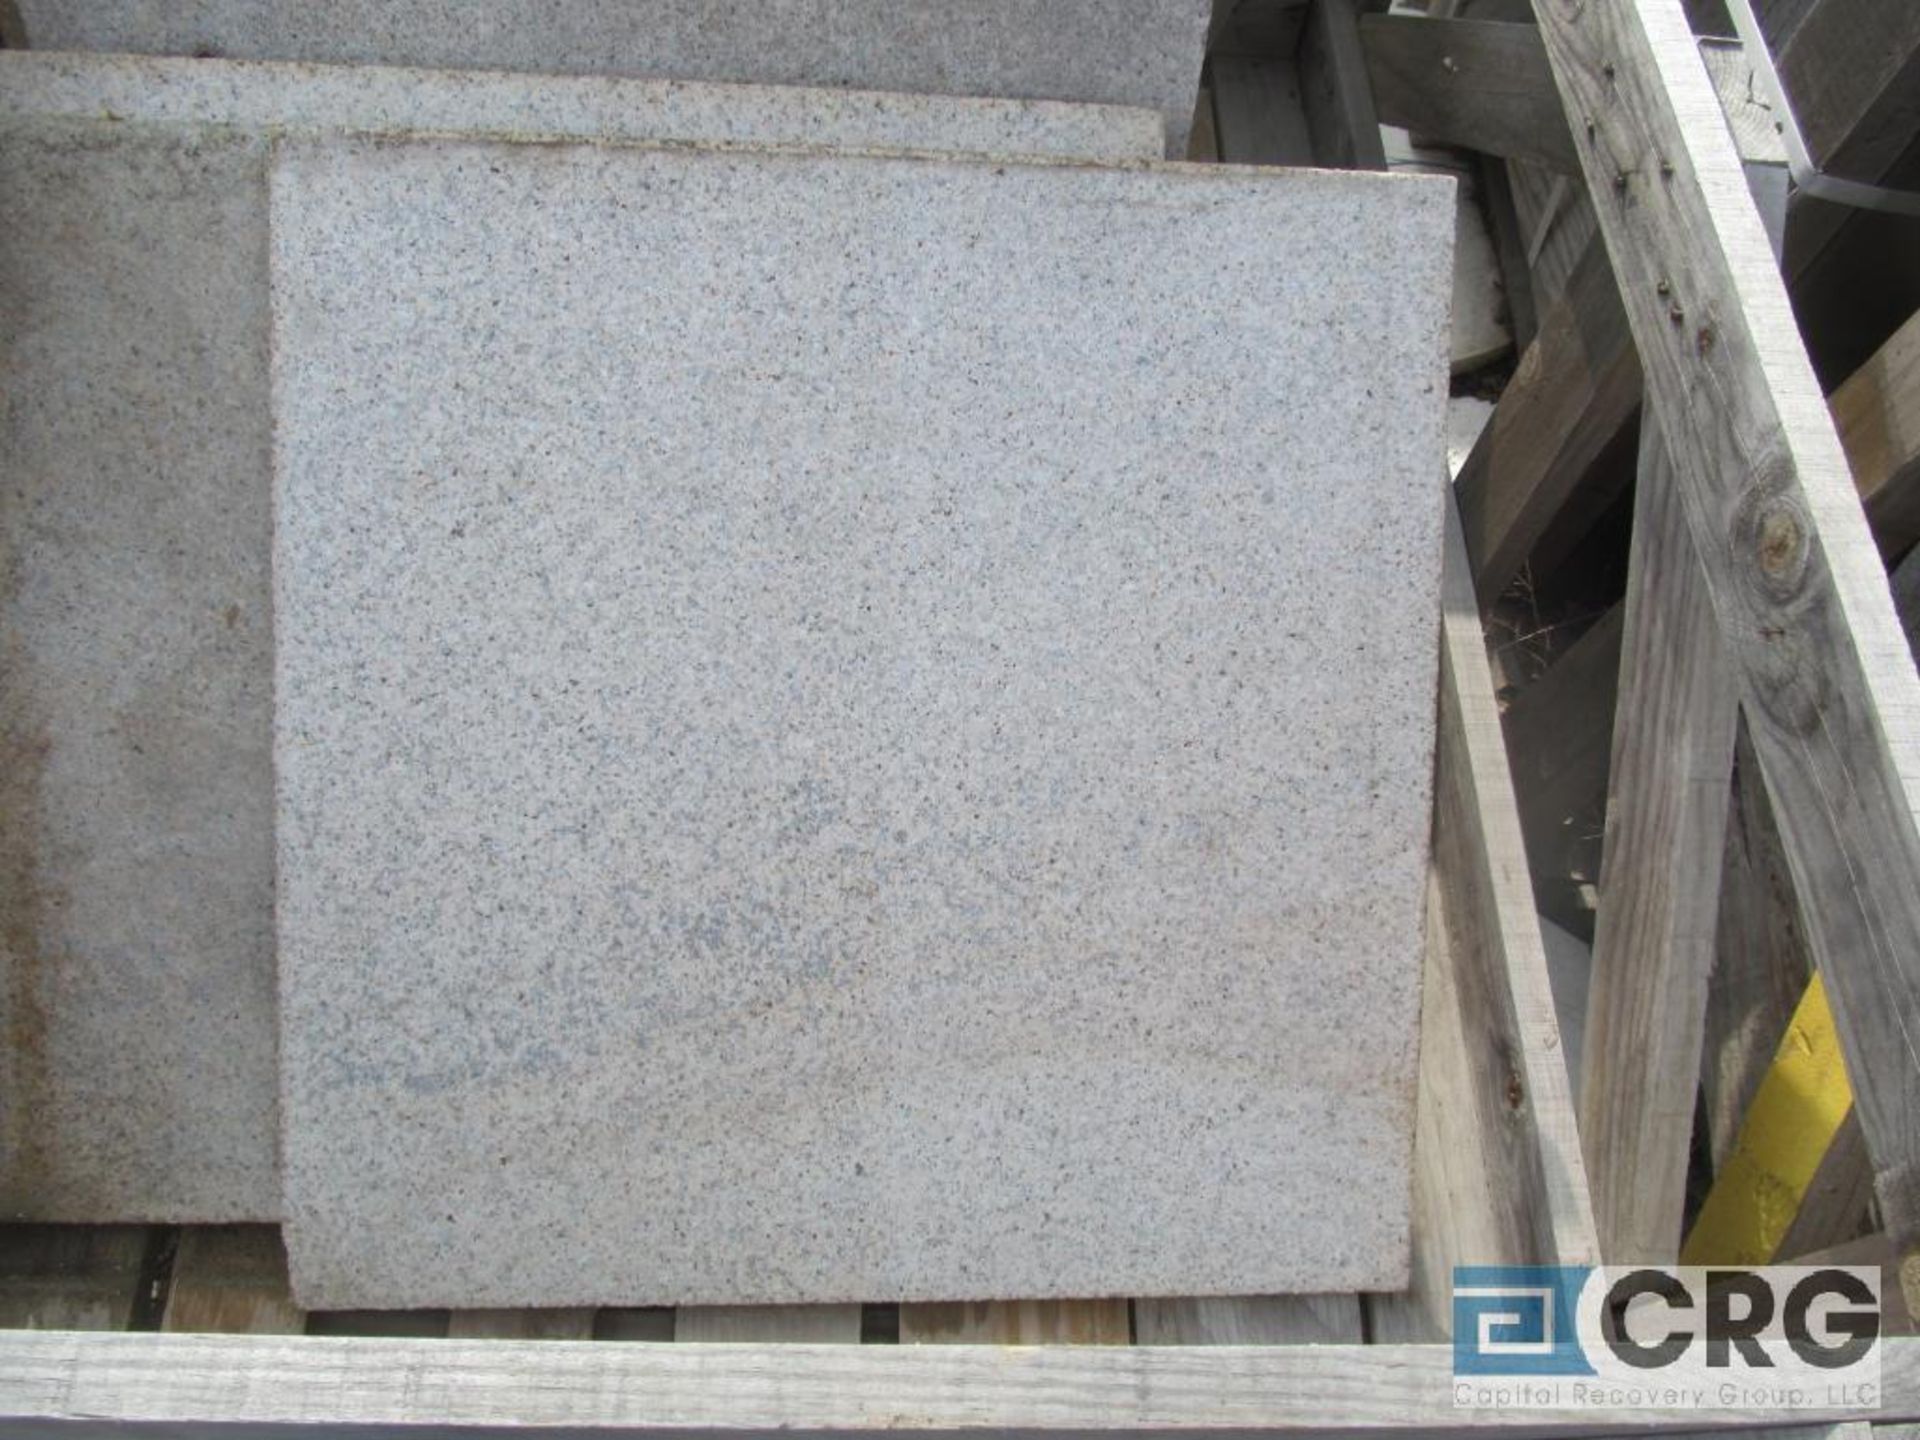 Lot of desert gold granite tiles, 3/4 in. thick, Stone Quest Will load for $25.00 per crate